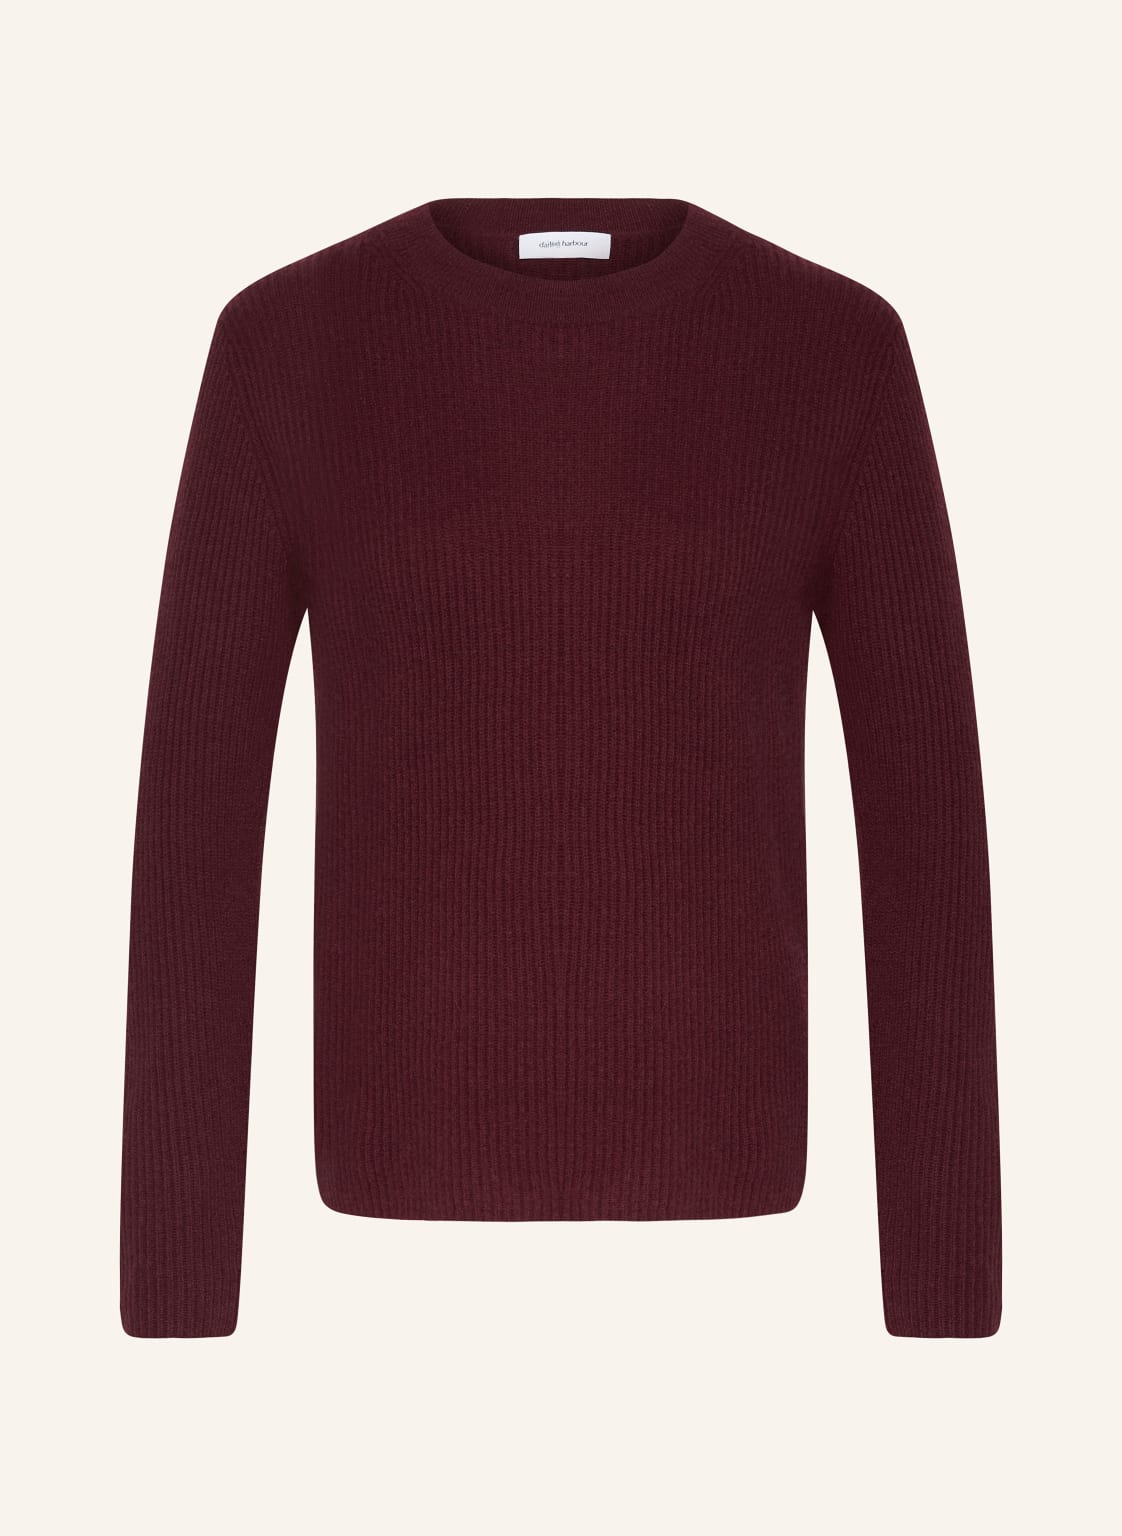 Darling Harbour Cashmere-Pullover rot von darling harbour